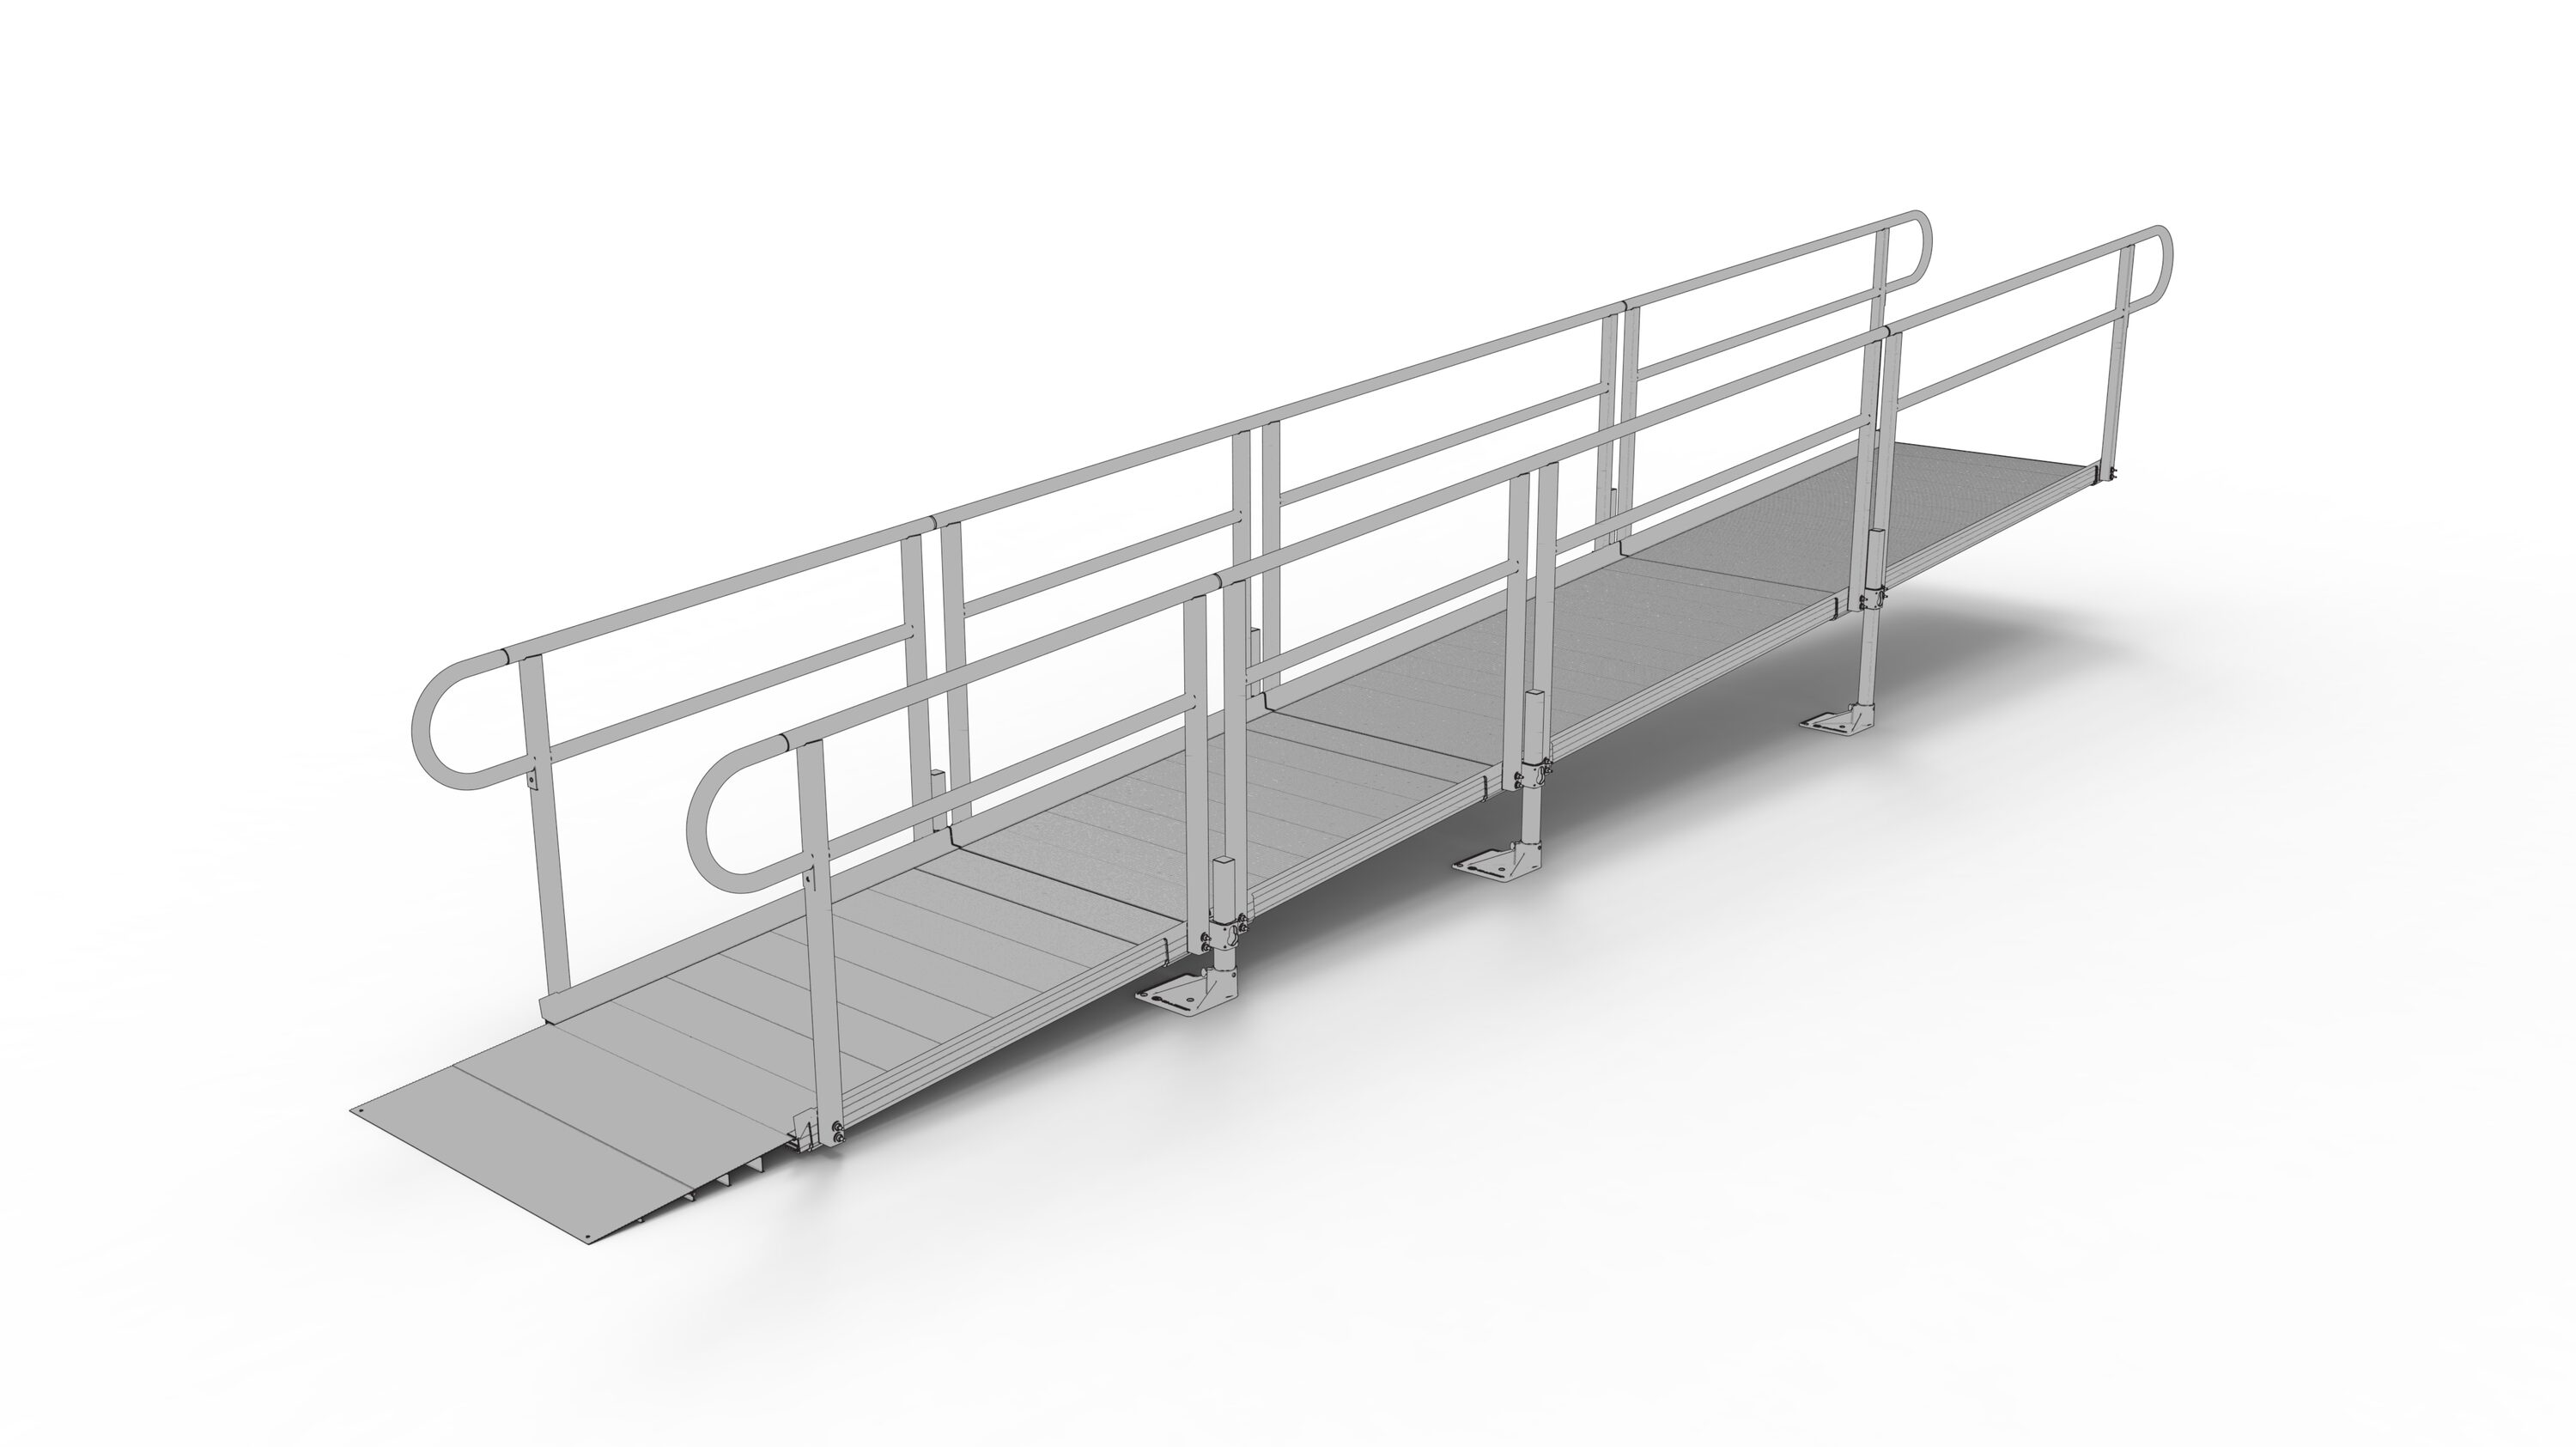 EZ-ACCESS Modular Wheelchair Ramps at Lowes.com